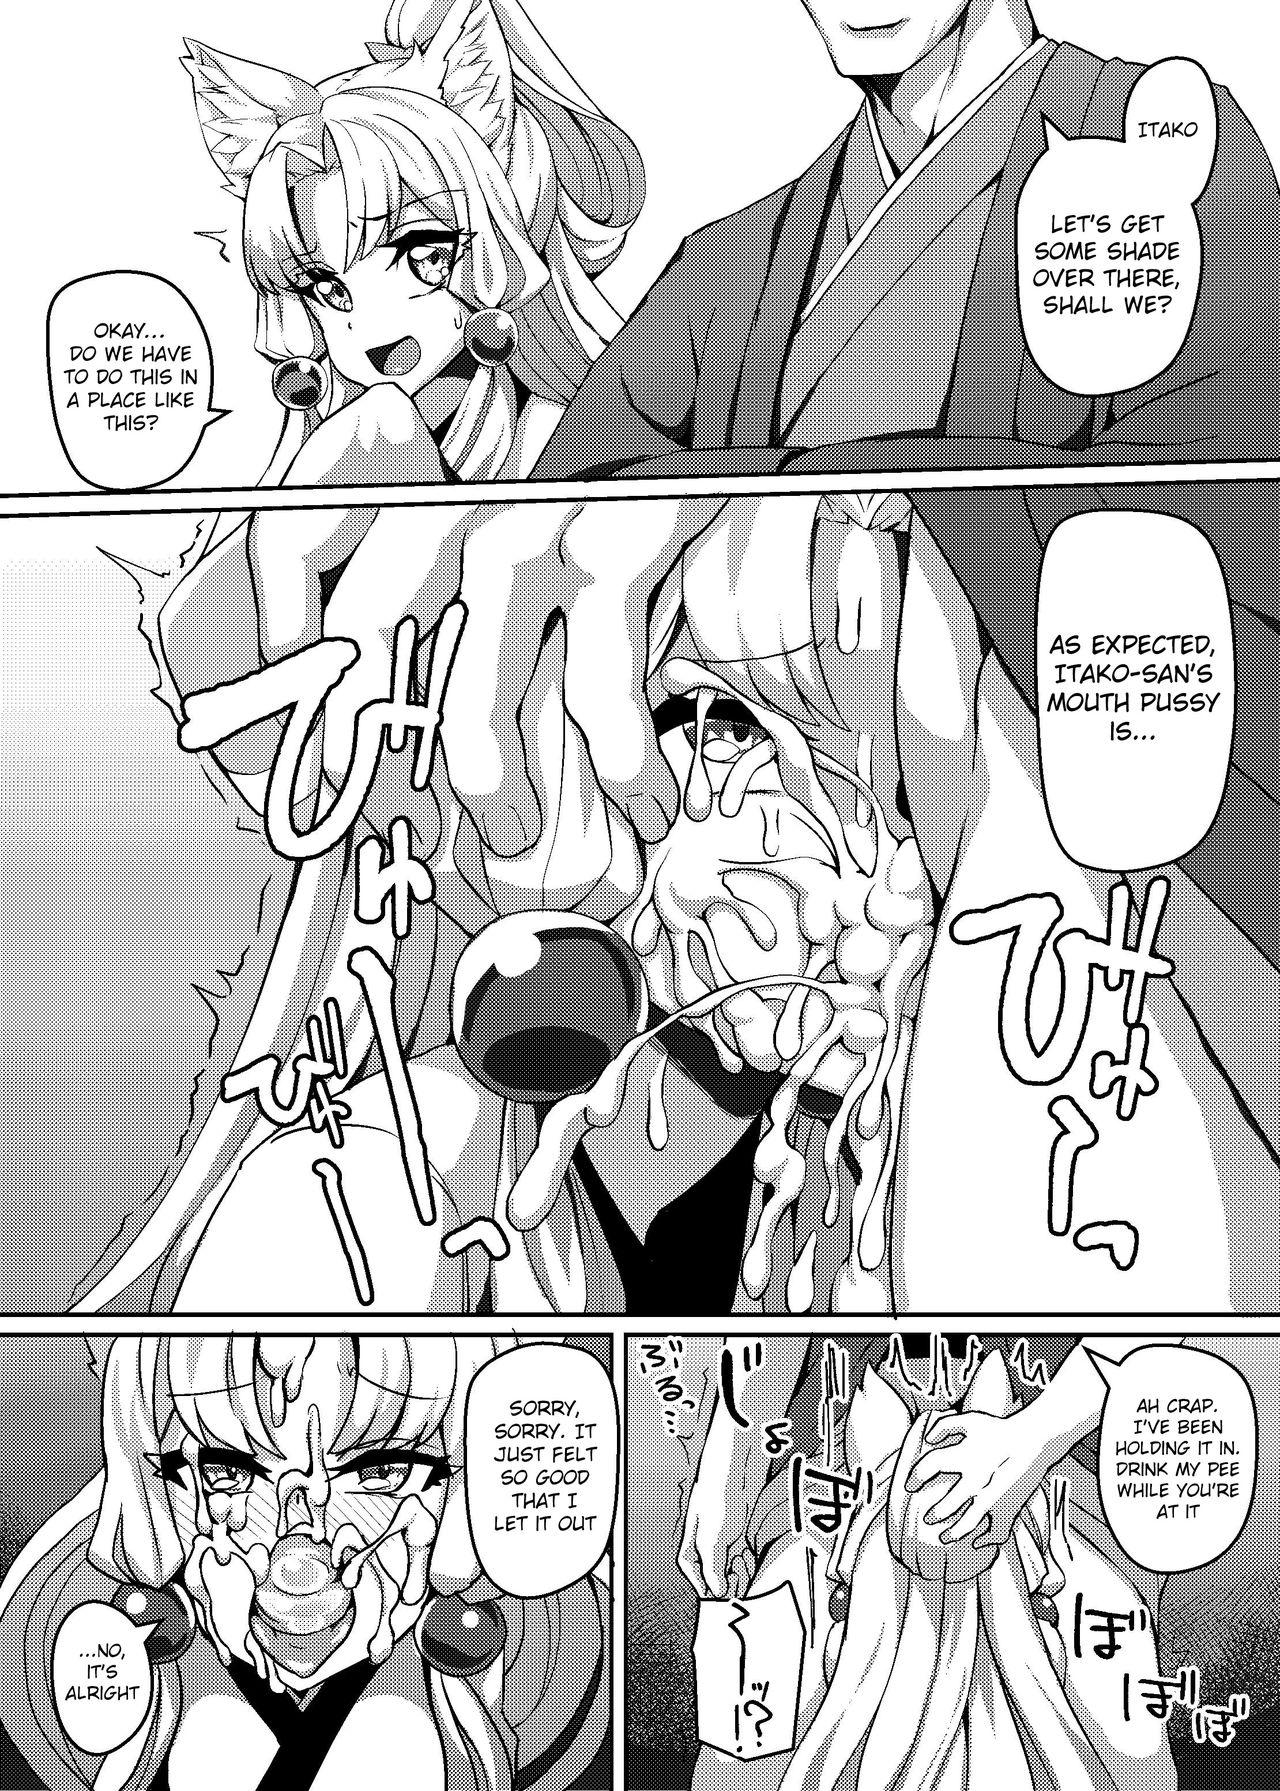 Coroa Talk Character Okuchi Only Book - Vocaloid Voiceroid Cheating Wife - Page 10